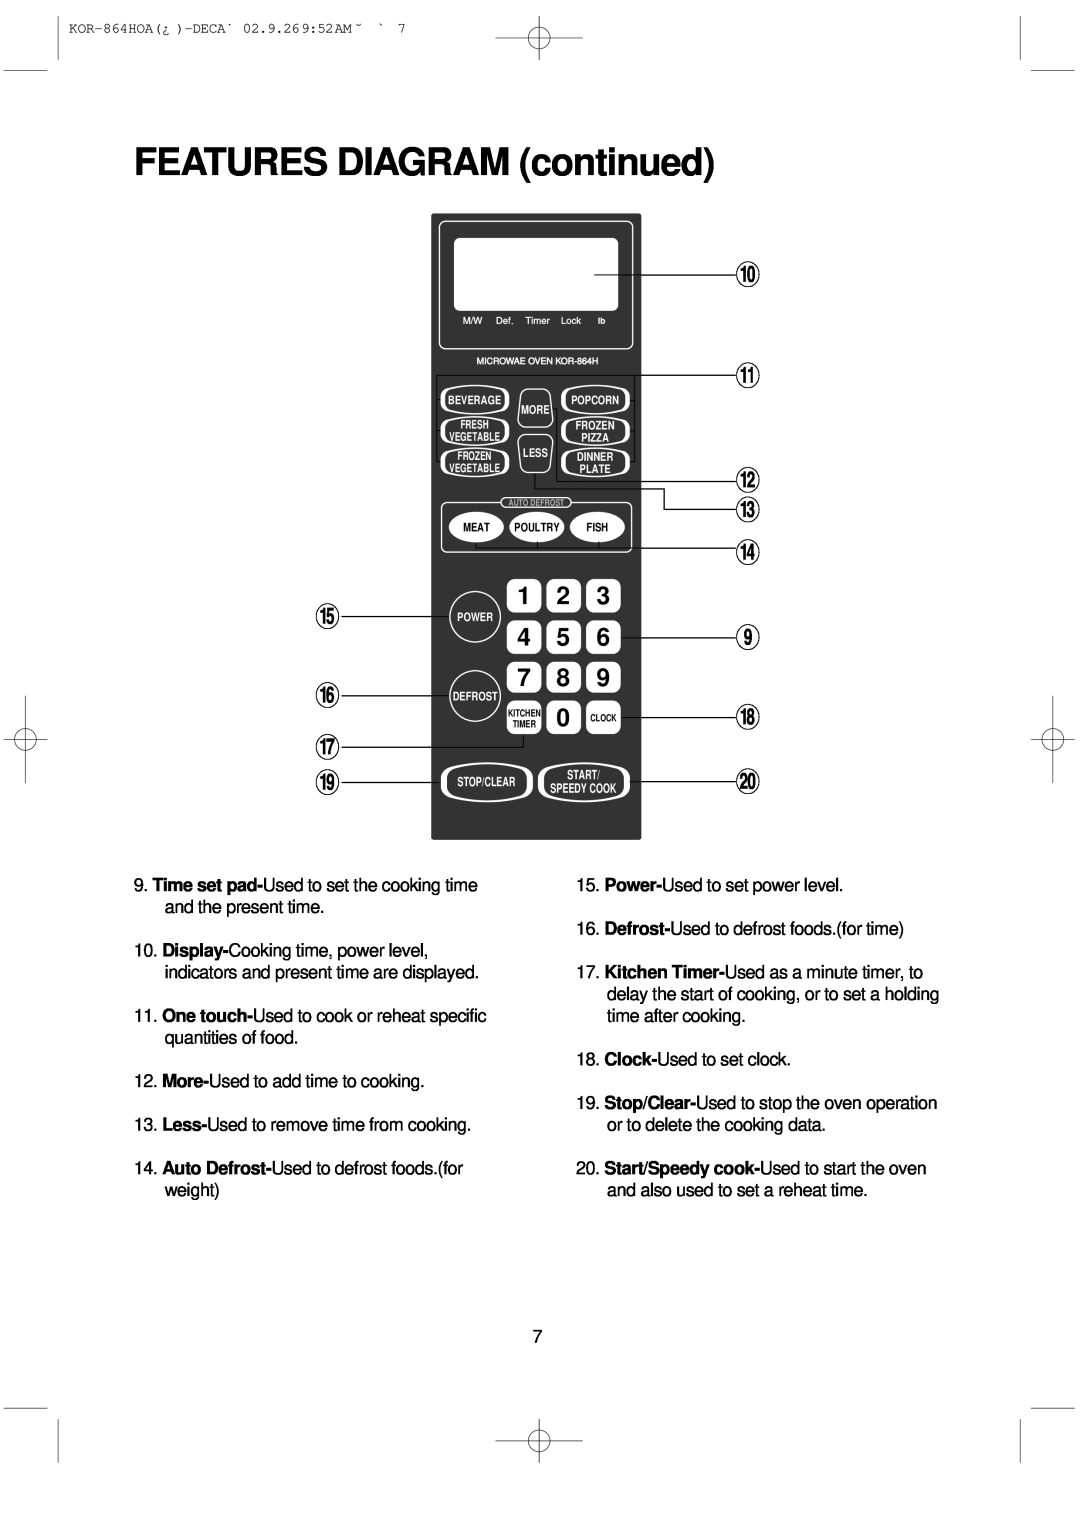 Daewoo KOR-864H operating instructions FEATURES DIAGRAM continued 